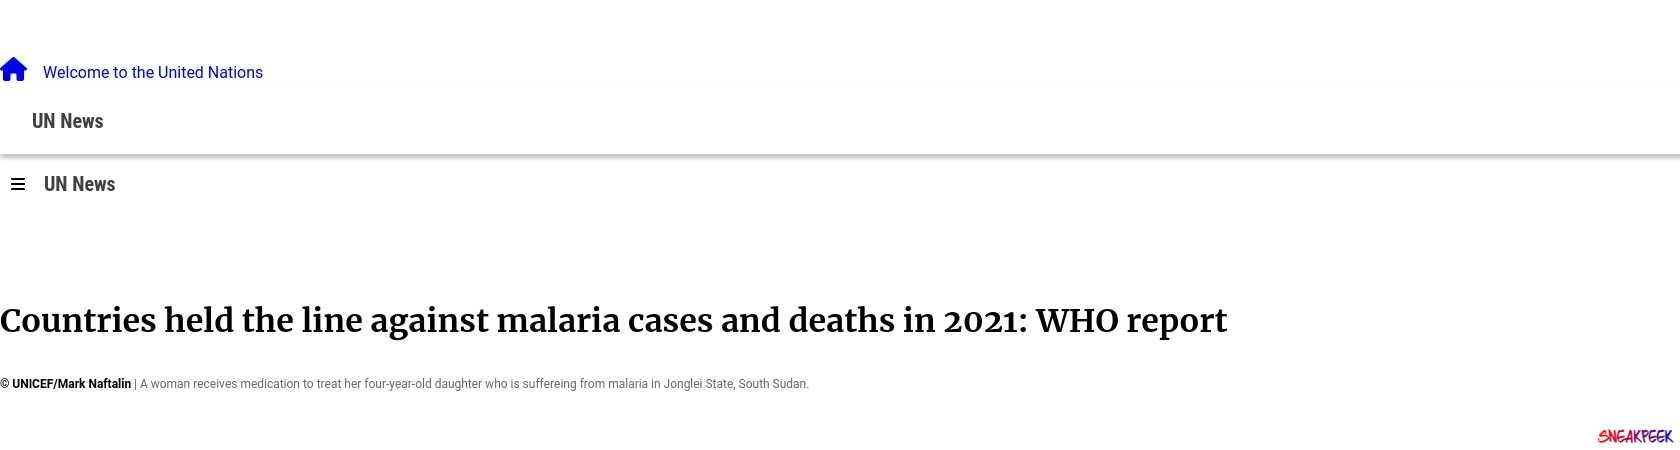 Read the full Article:  ⭲ Countries held the line against malaria cases and deaths in 2021: WHO report  